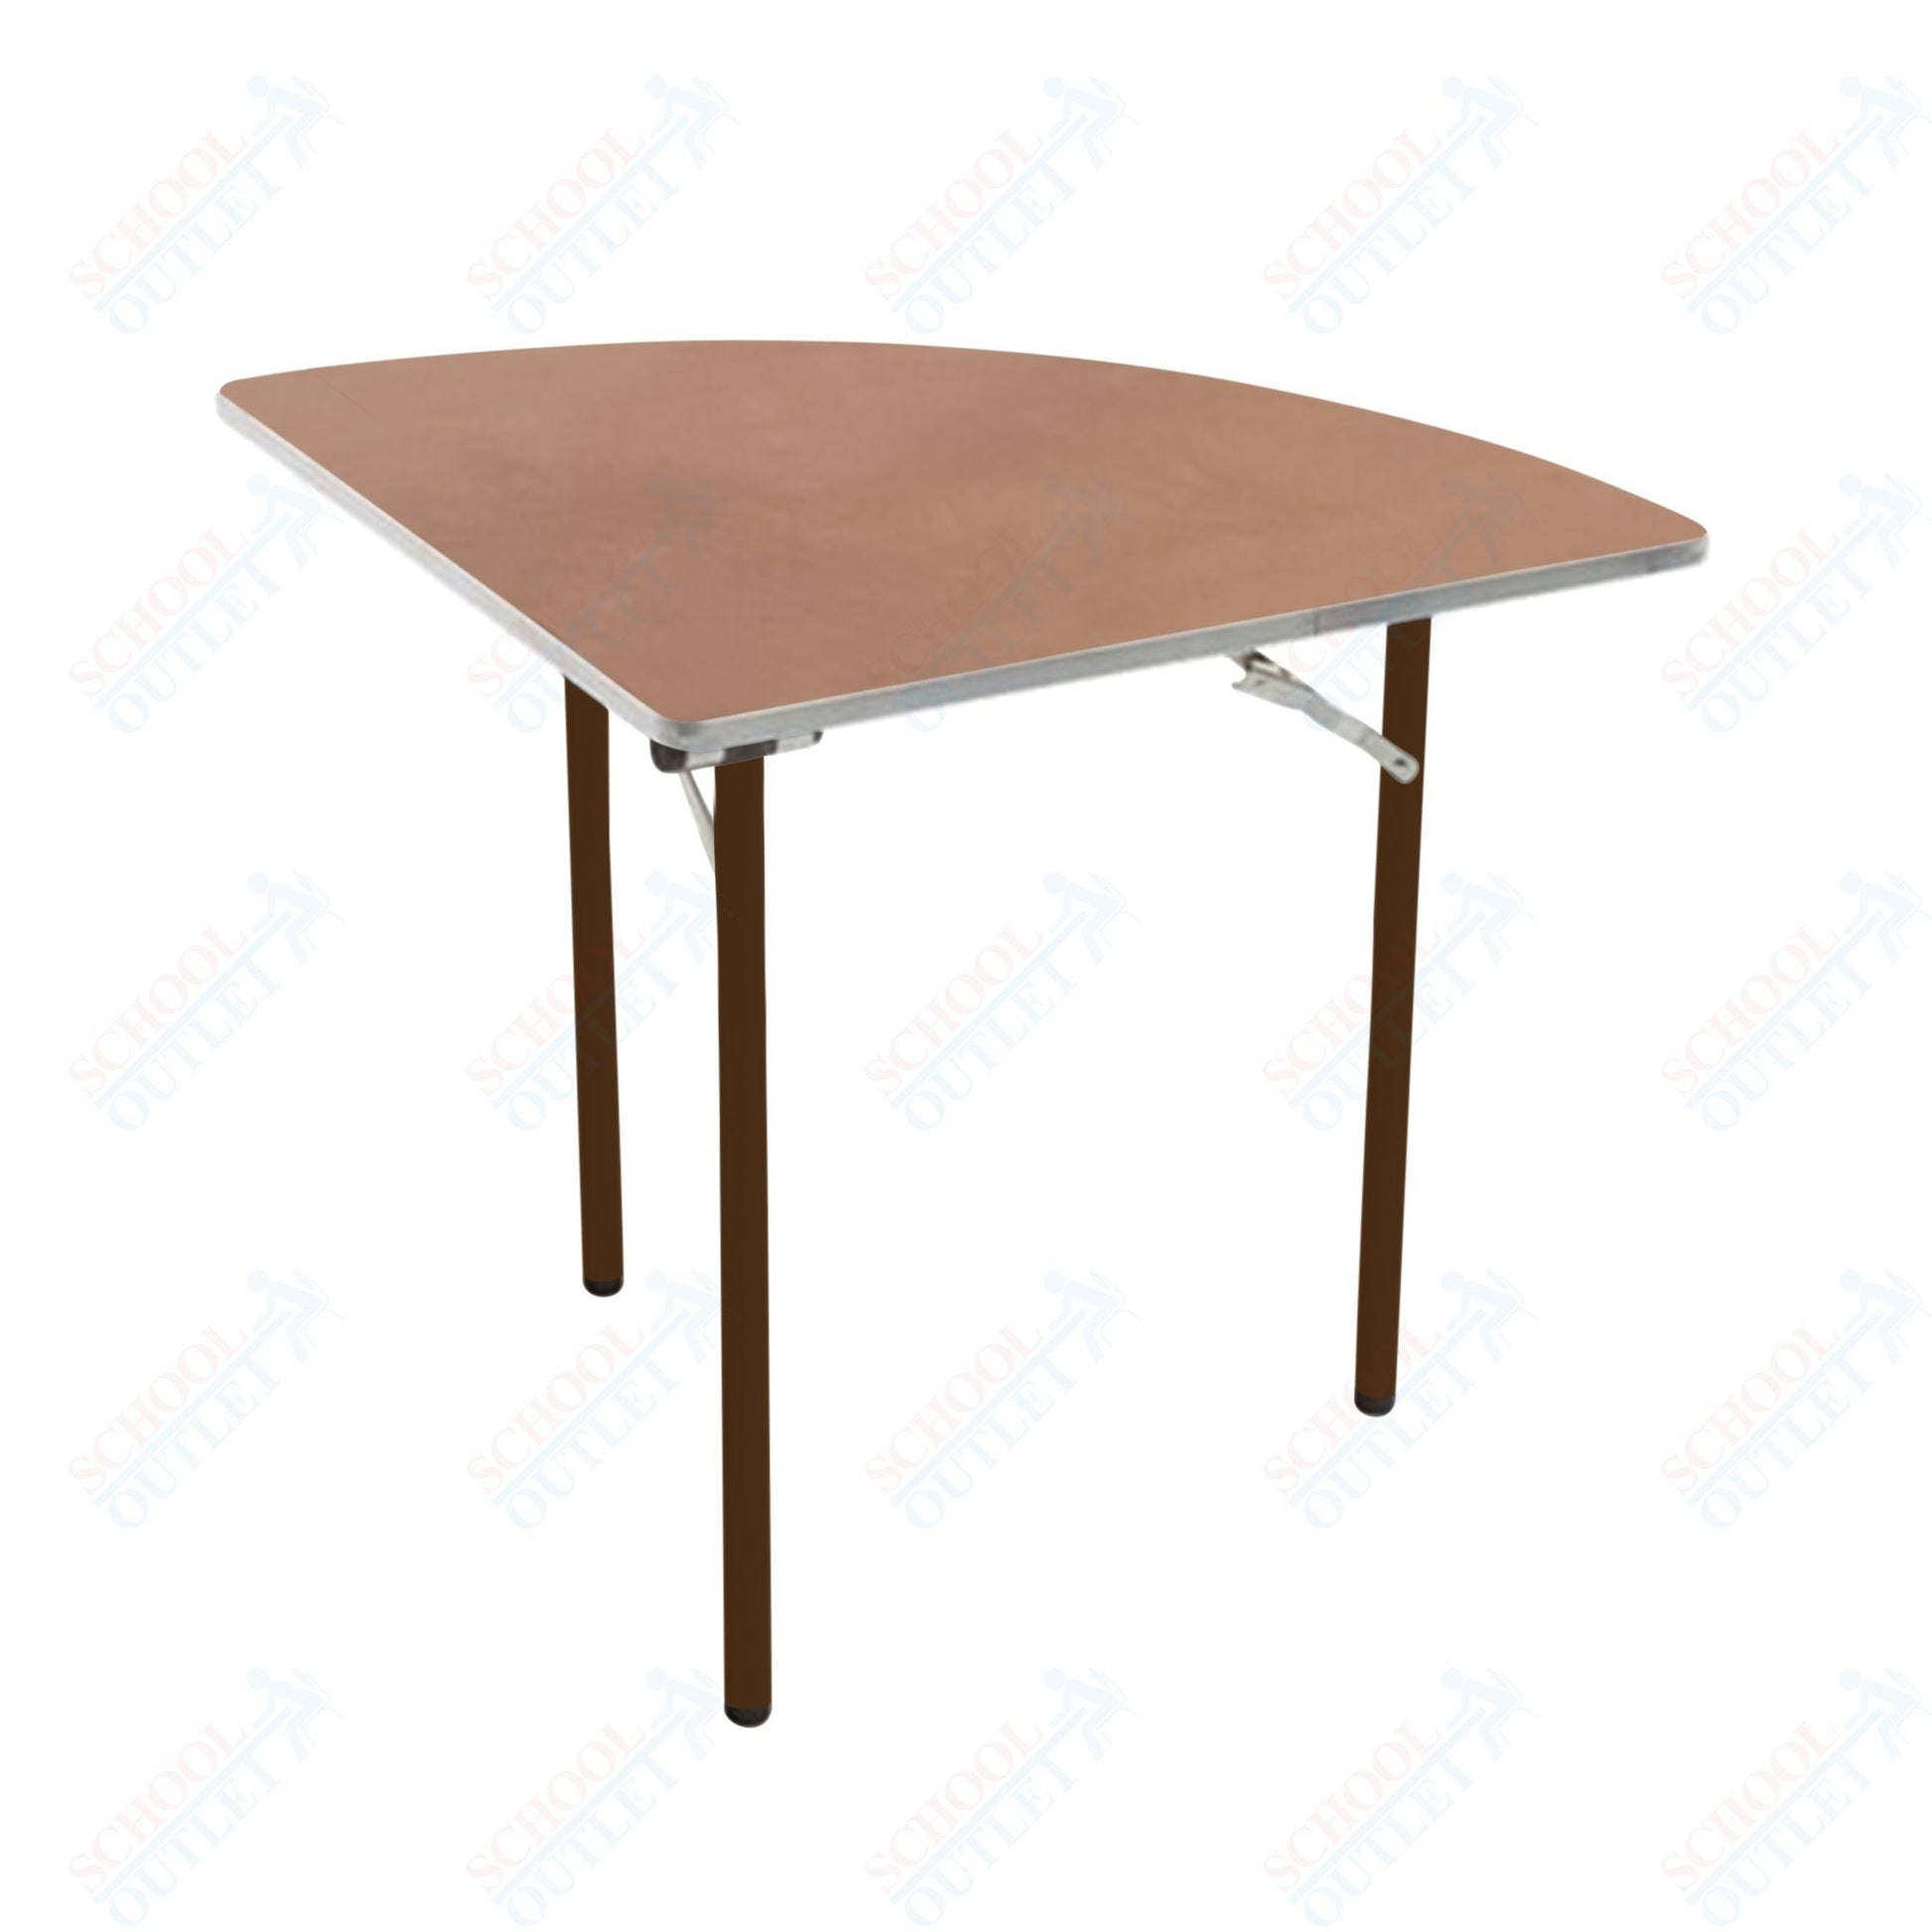 AmTab Folding Table - Plywood Stained and Sealed - Aluminum Edge - Quarter Round - Quarter 48" Diameter x 29"H (AmTab AMT - QR48PA) - SchoolOutlet